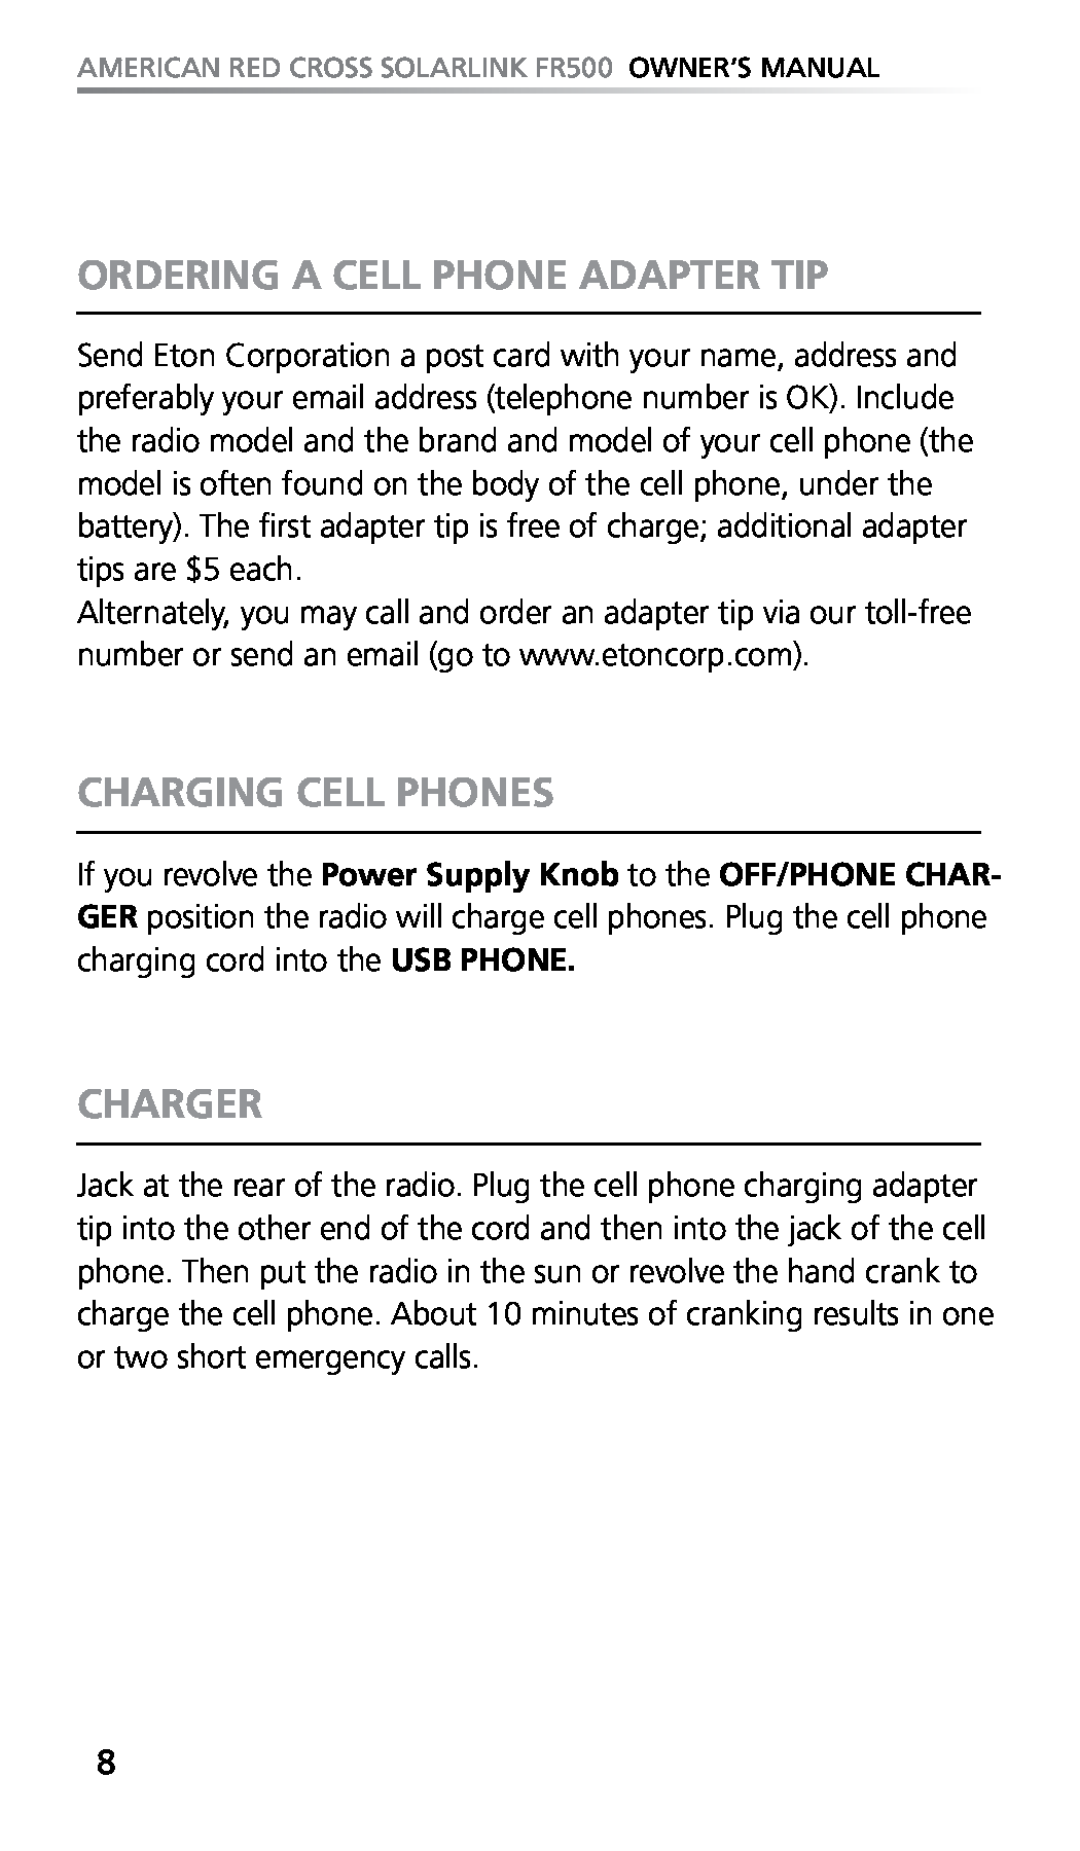 Eton FR500 owner manual Ordering A Cell Phone Adapter Tip, Charging Cell Phones, Charger 